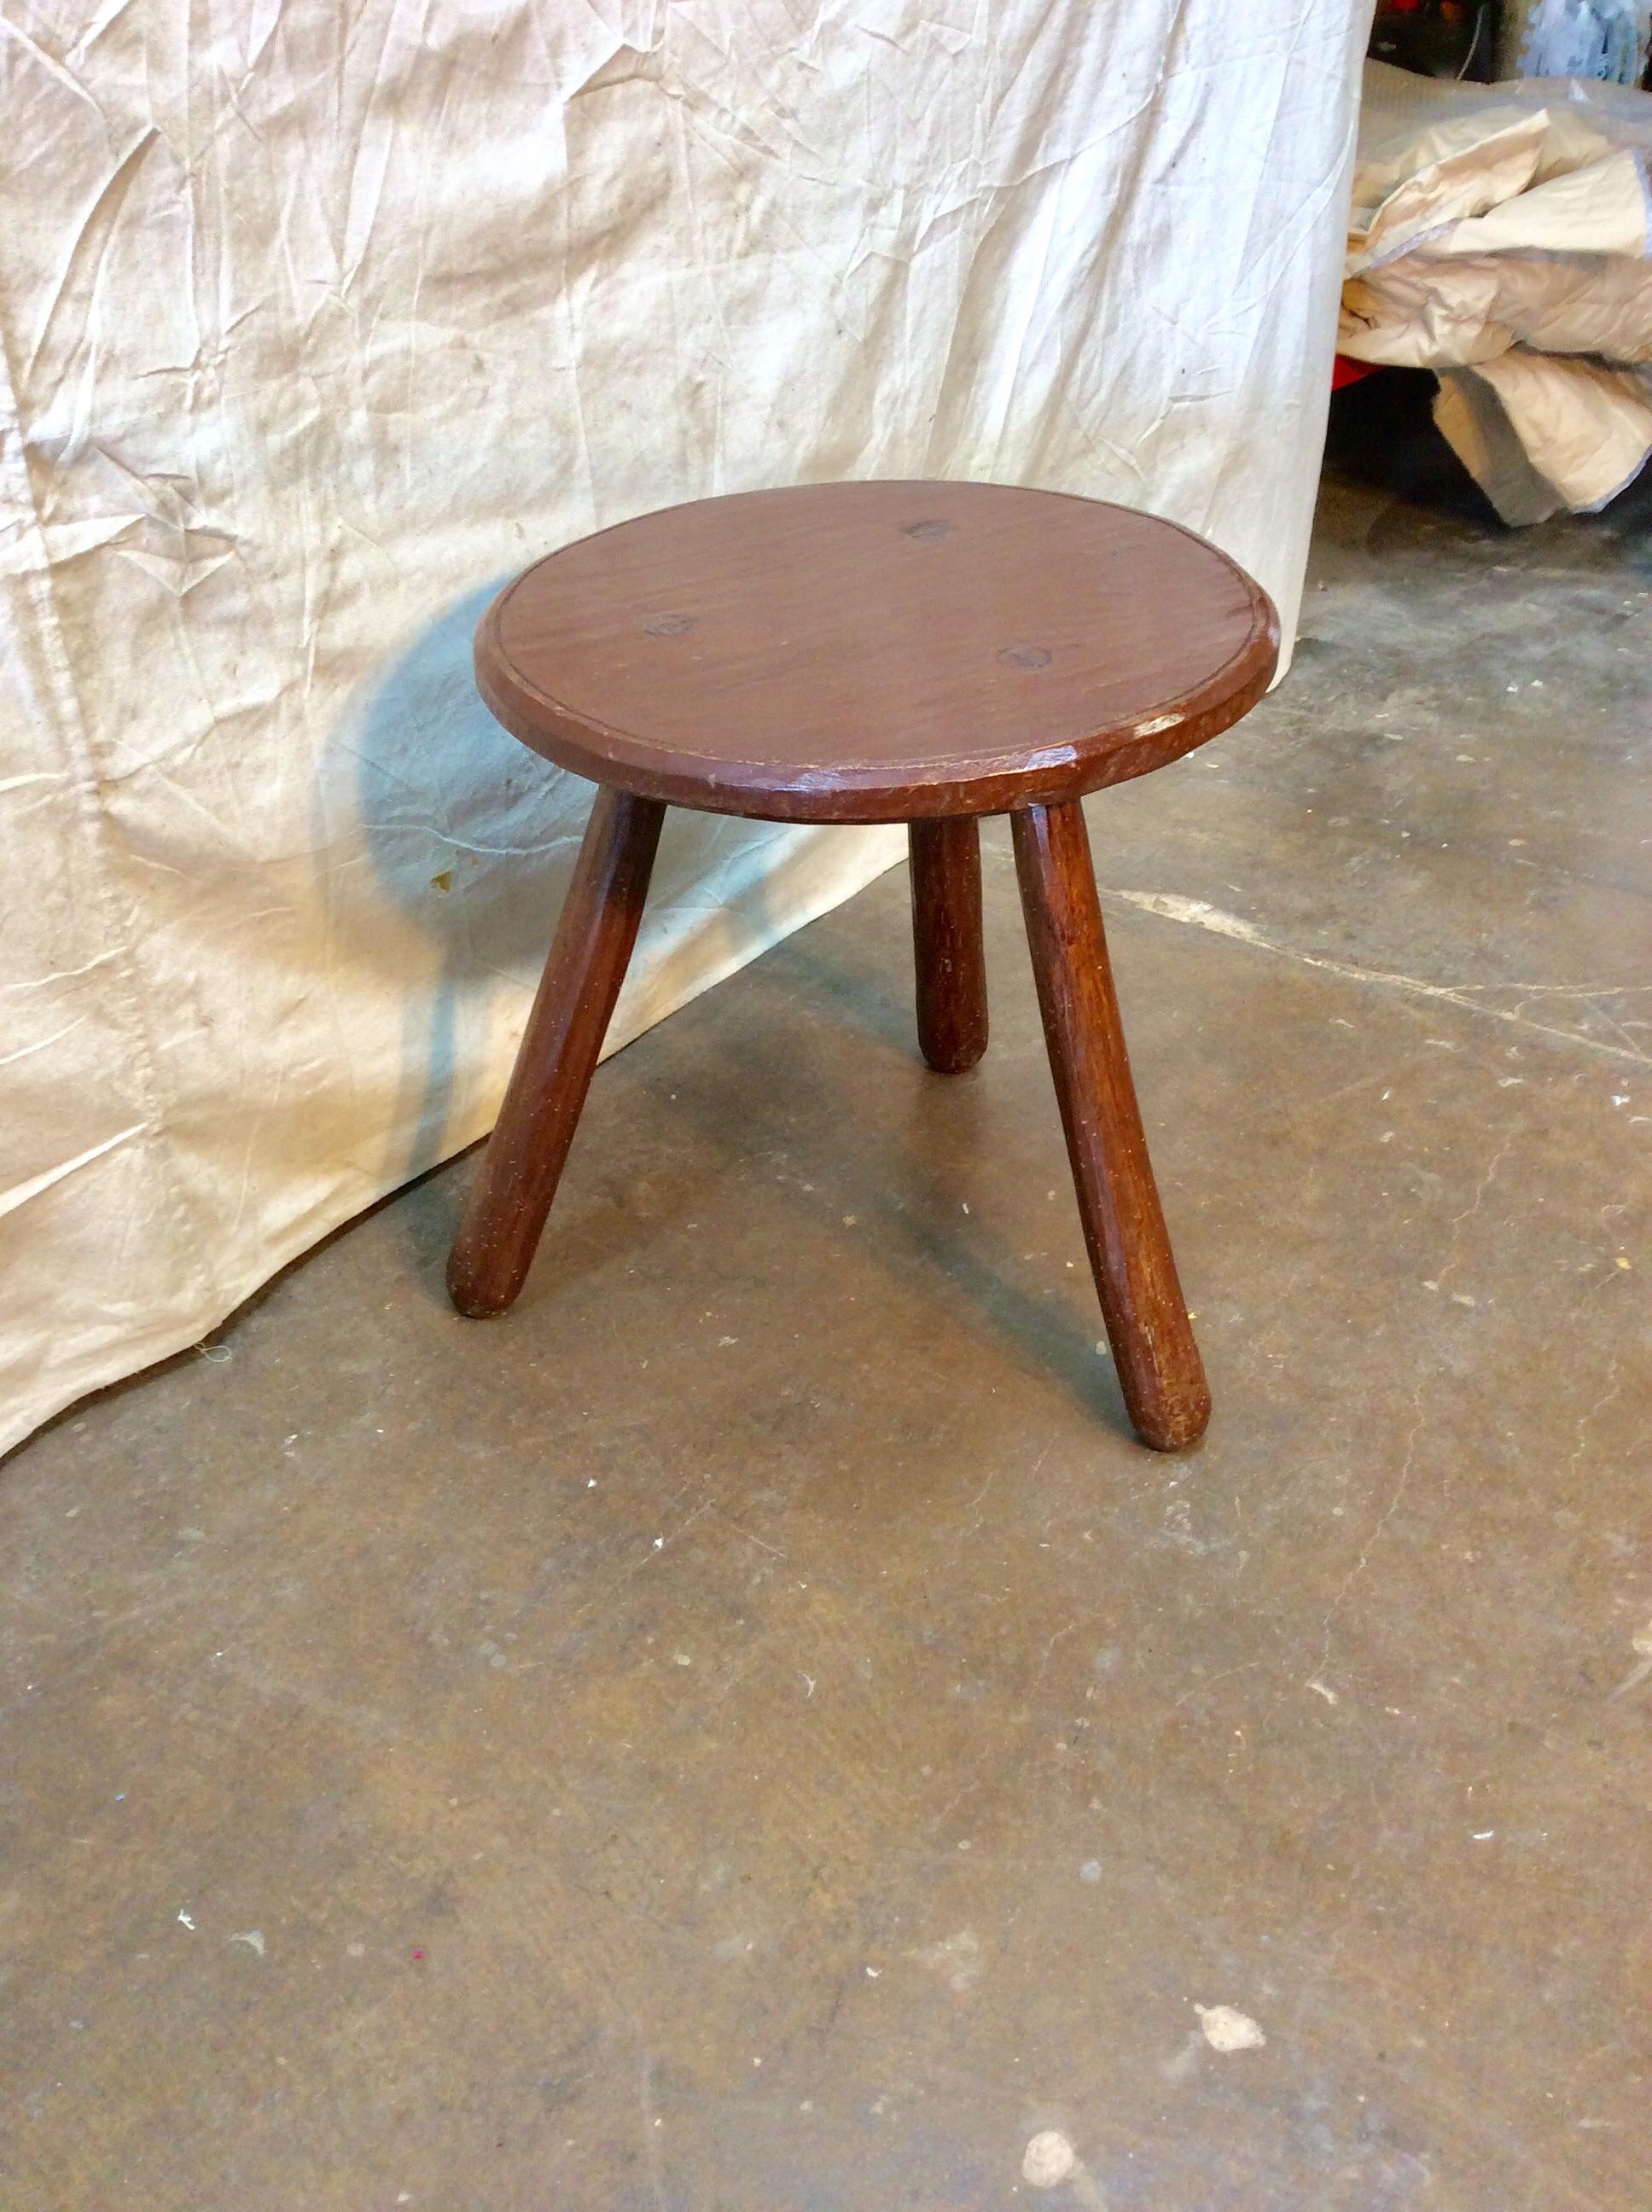 Found in the South of France, this Early 20th century French Walnut Side Table is crafted with a beveled edge round top supported by three splayed legs that widen toward the ends. The round top and sleek hand carved legs compliment the visually